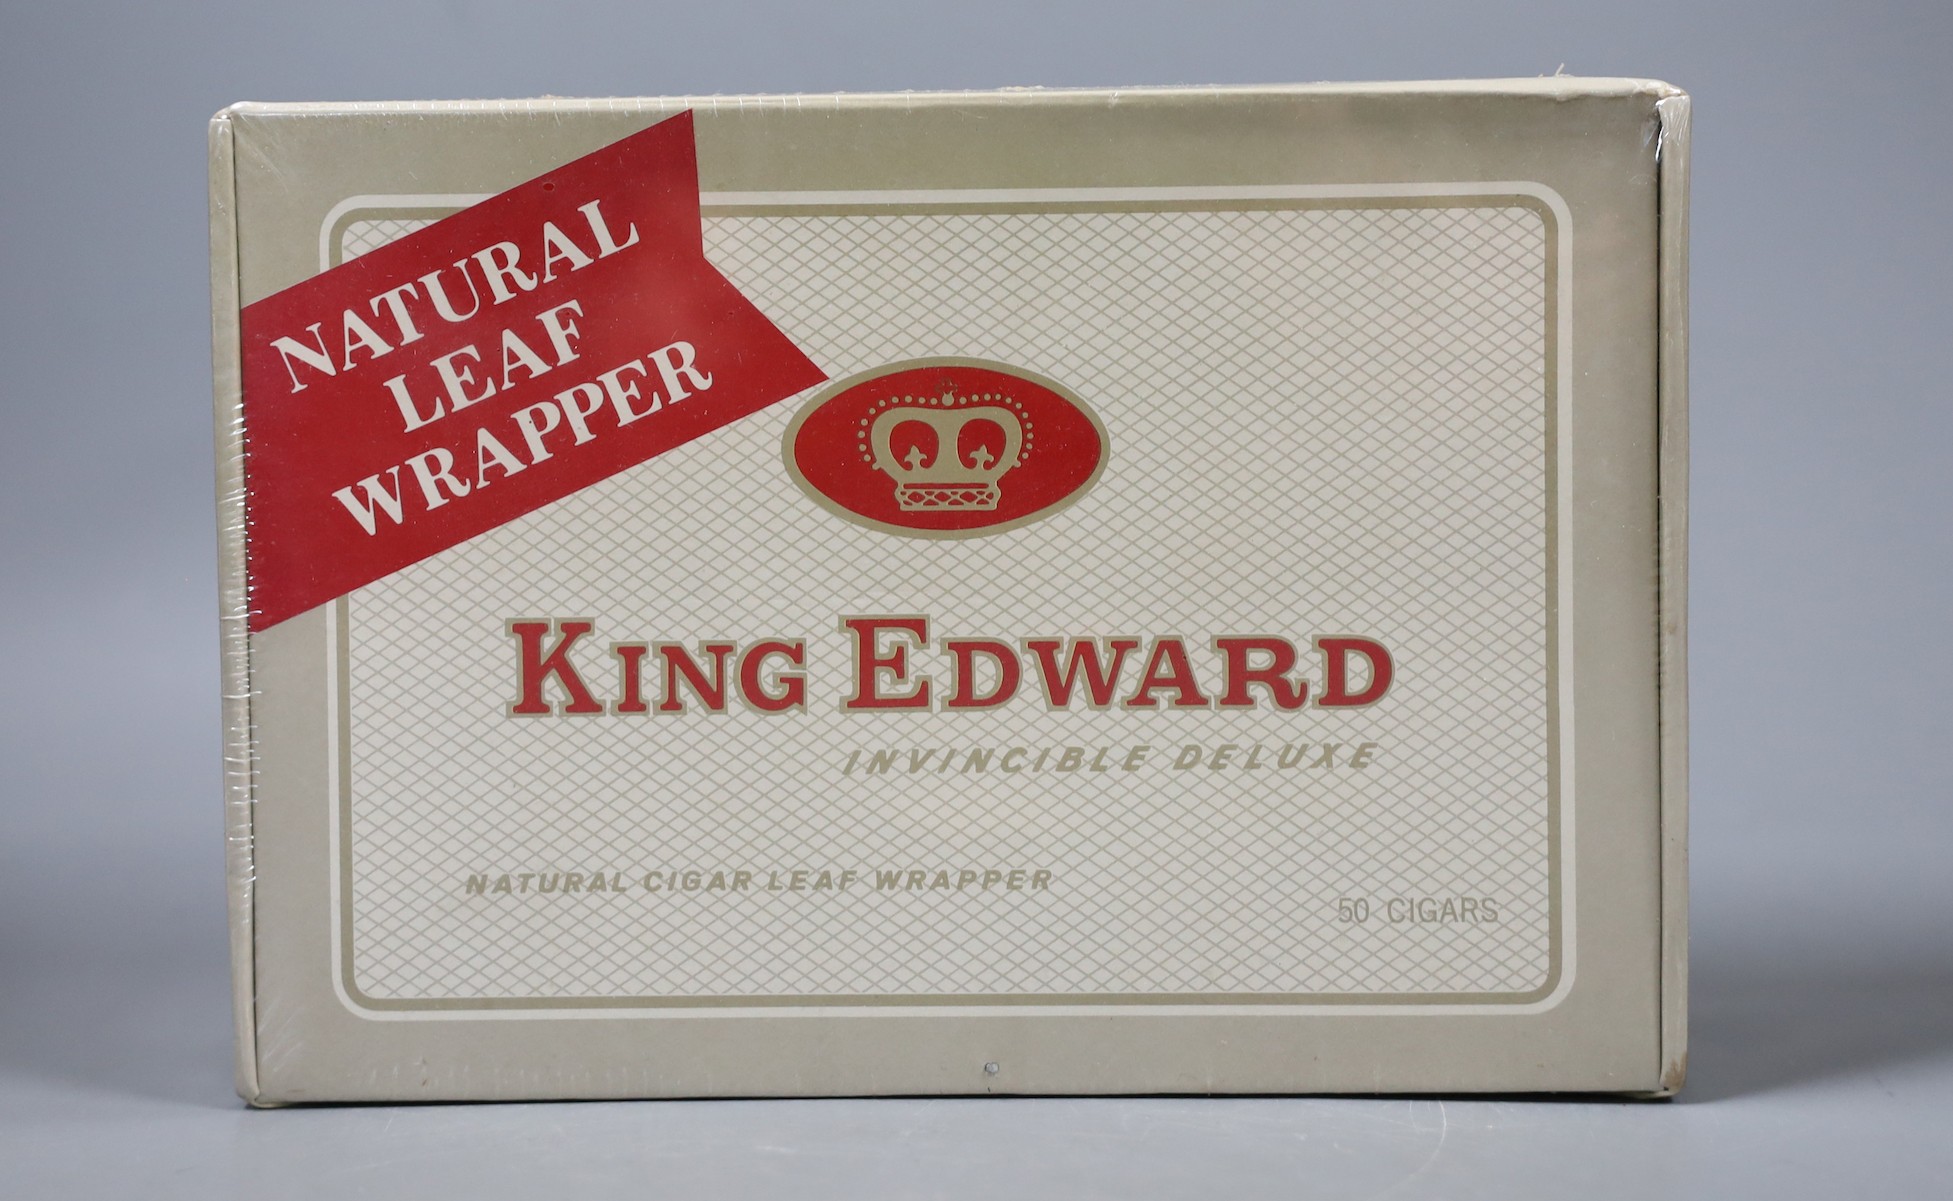 A set of 50 King Edward Invincible Deluxe cigars, in sealed box